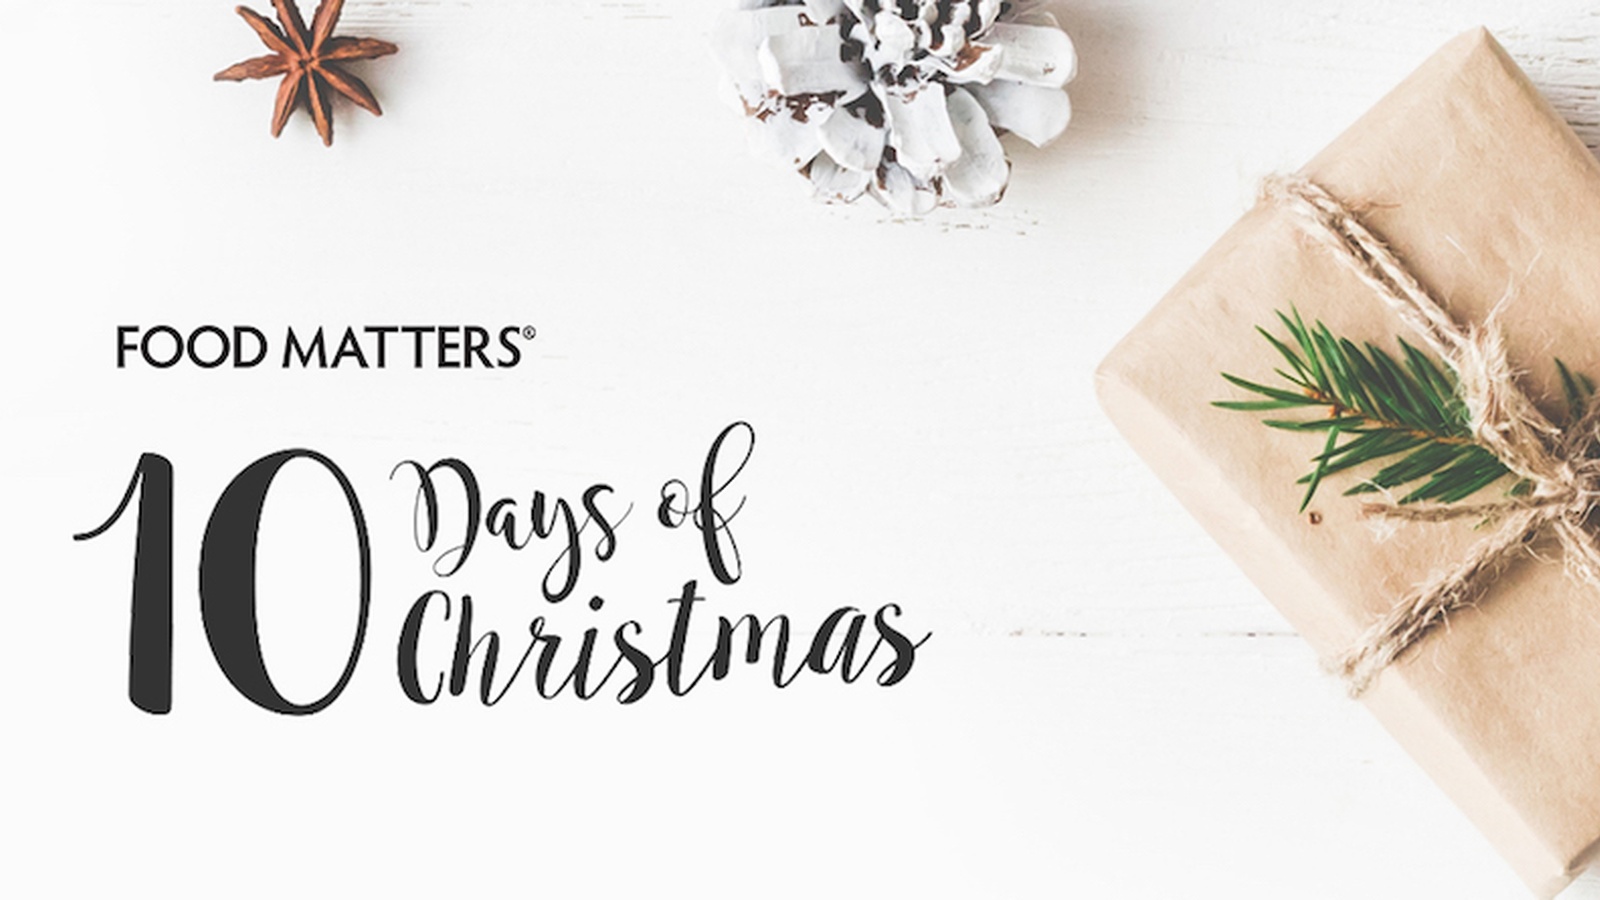 The Food Matters 10 Days of Christmas 